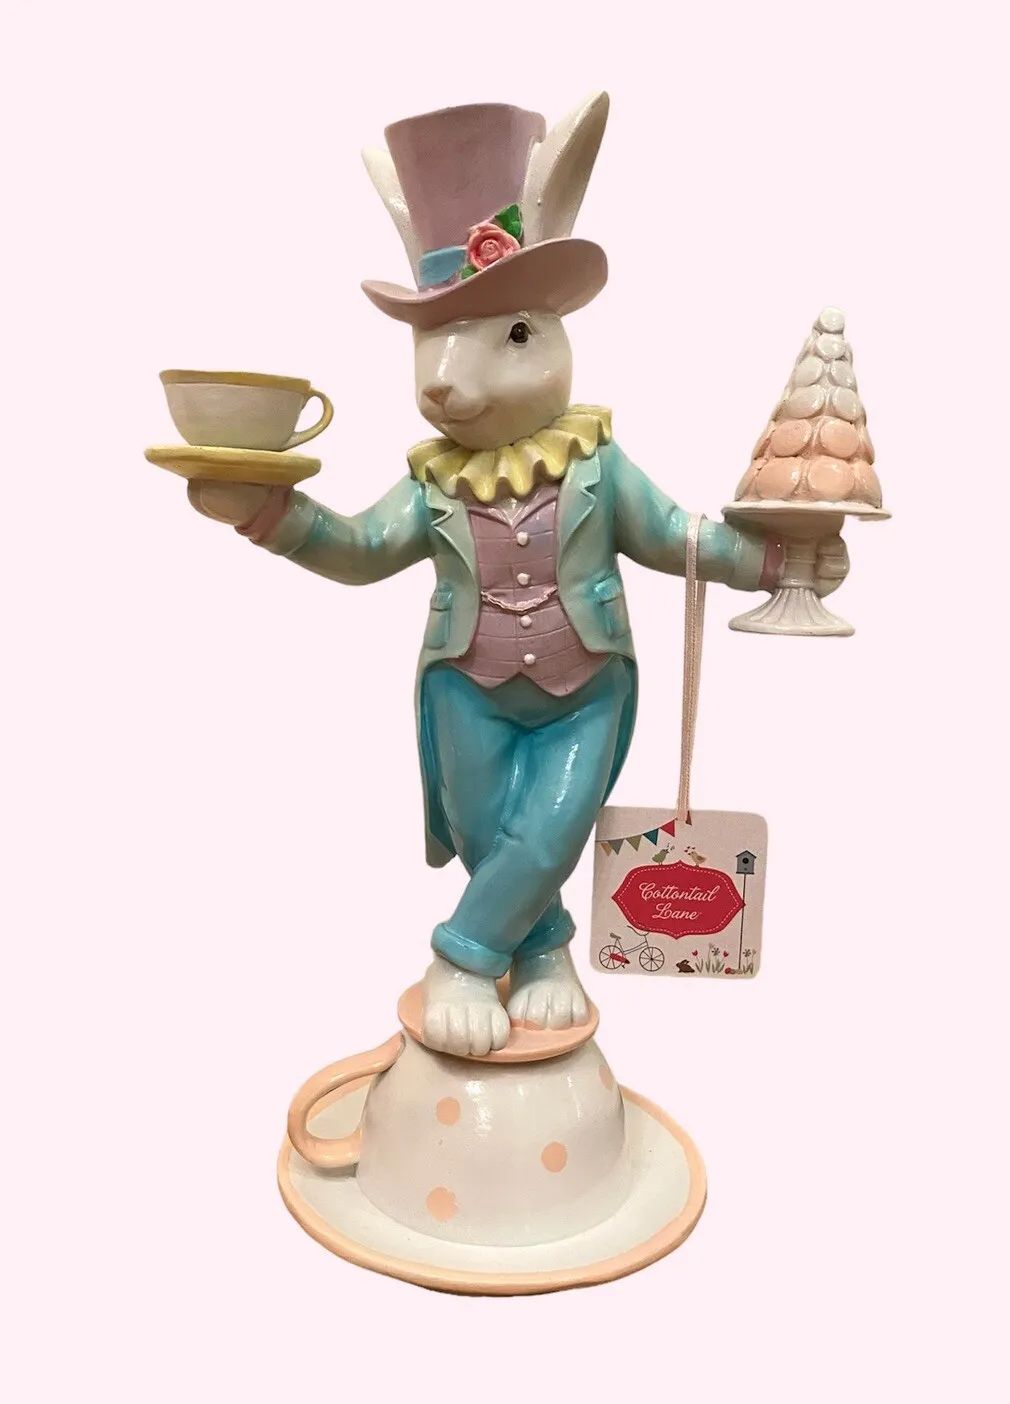 Cottontail Lane Mad Hatter Easter Bunny 15” Figure Macaroon Tree and Tea Cups  | eBay | eBay US